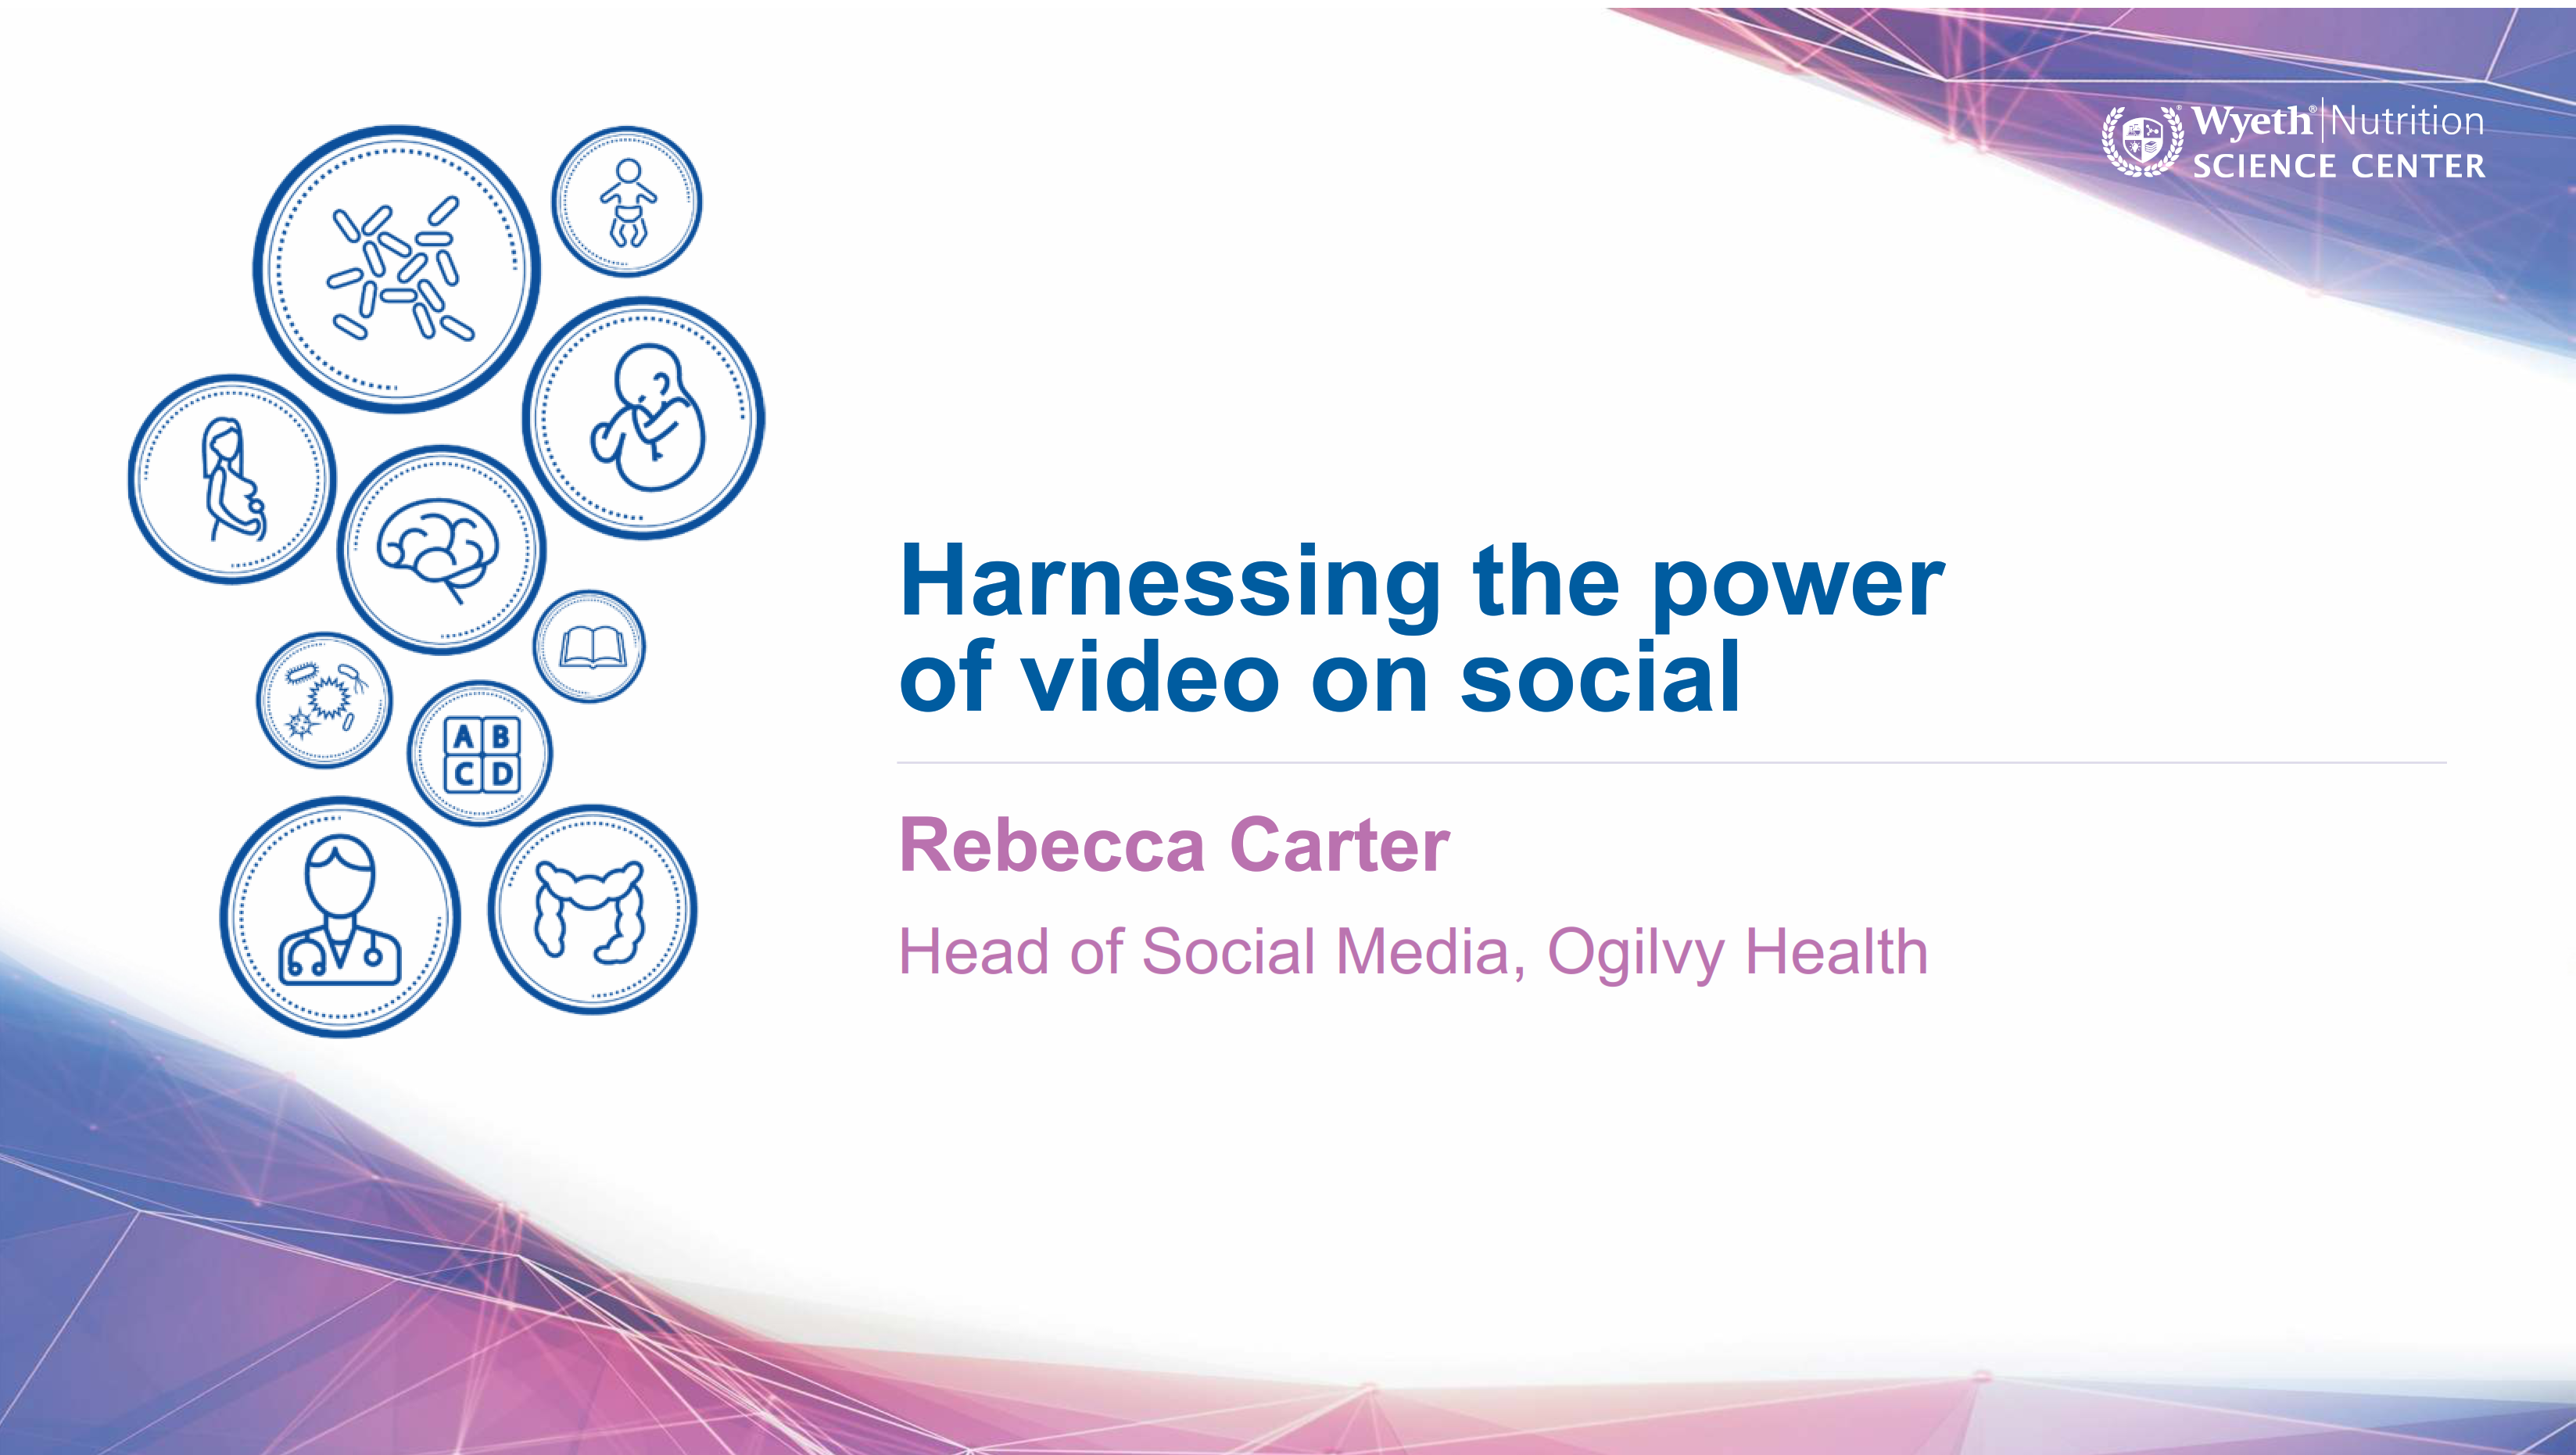 Harnessing the power of video on social